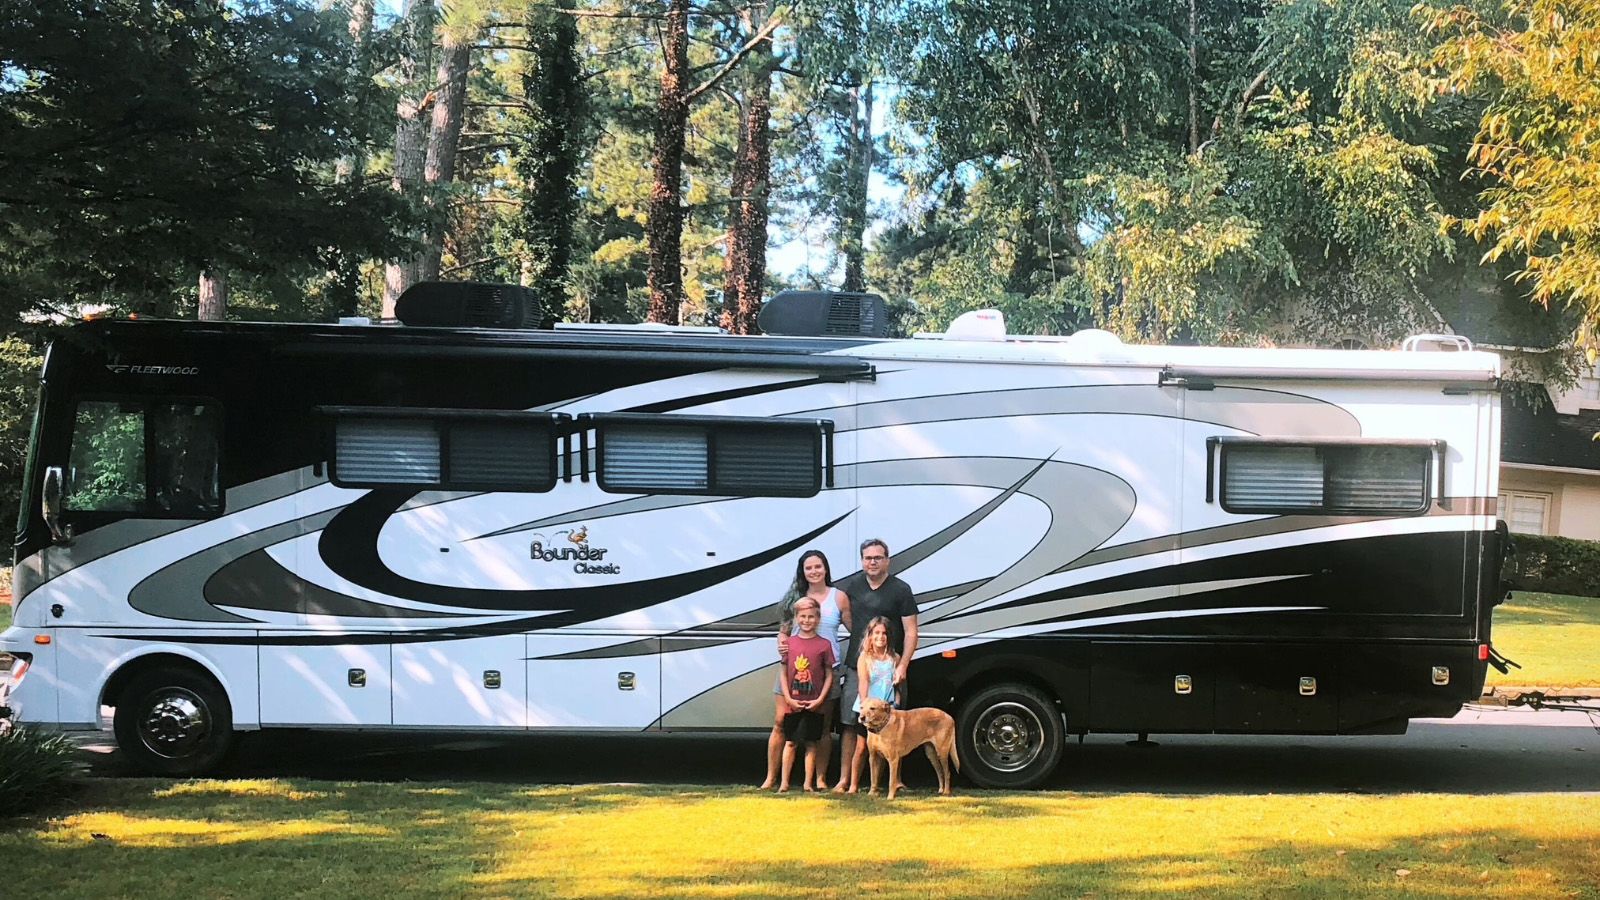 RVshare makes summer glamping vacations easier than ever